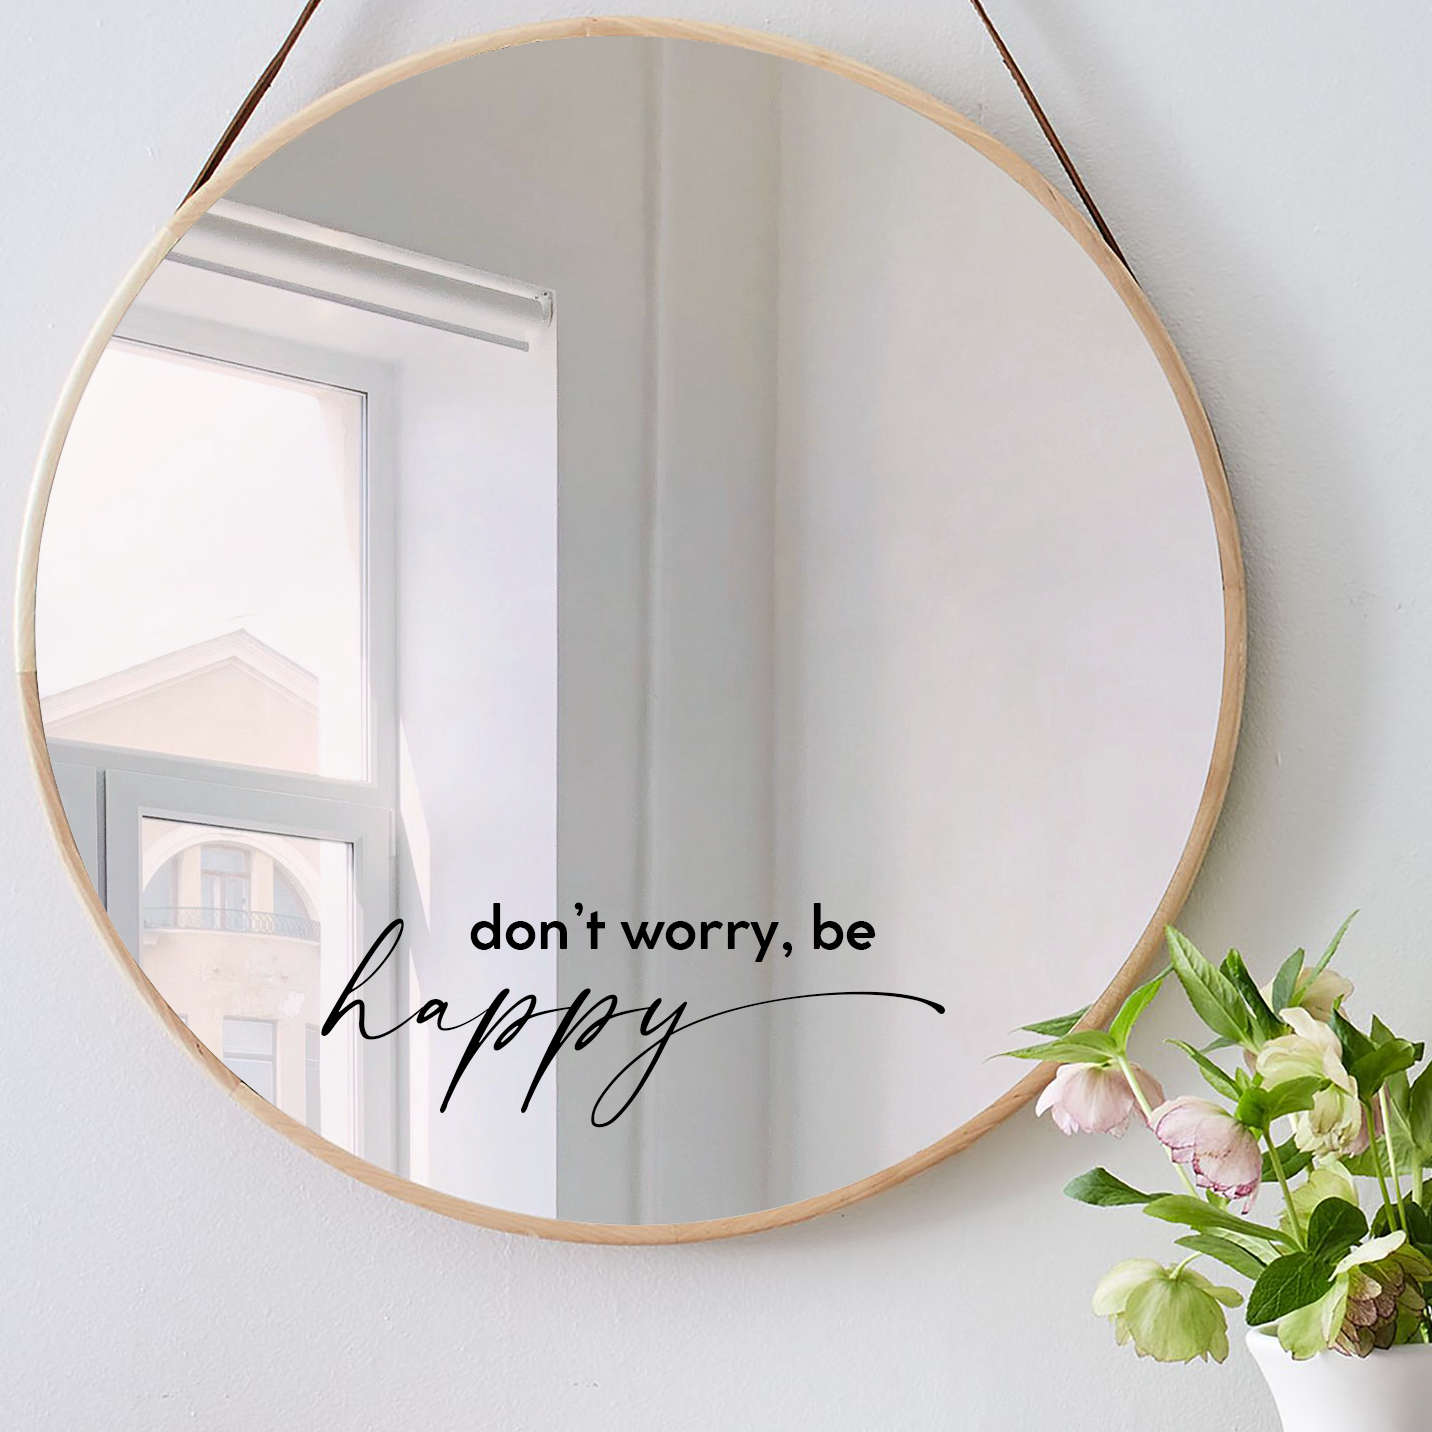 Retro Mirror Decal Vinyl Decal Sticker for Mirror Positive Quote Be Kind to Yourself Mirror Decal Mirror Daily Affirmation